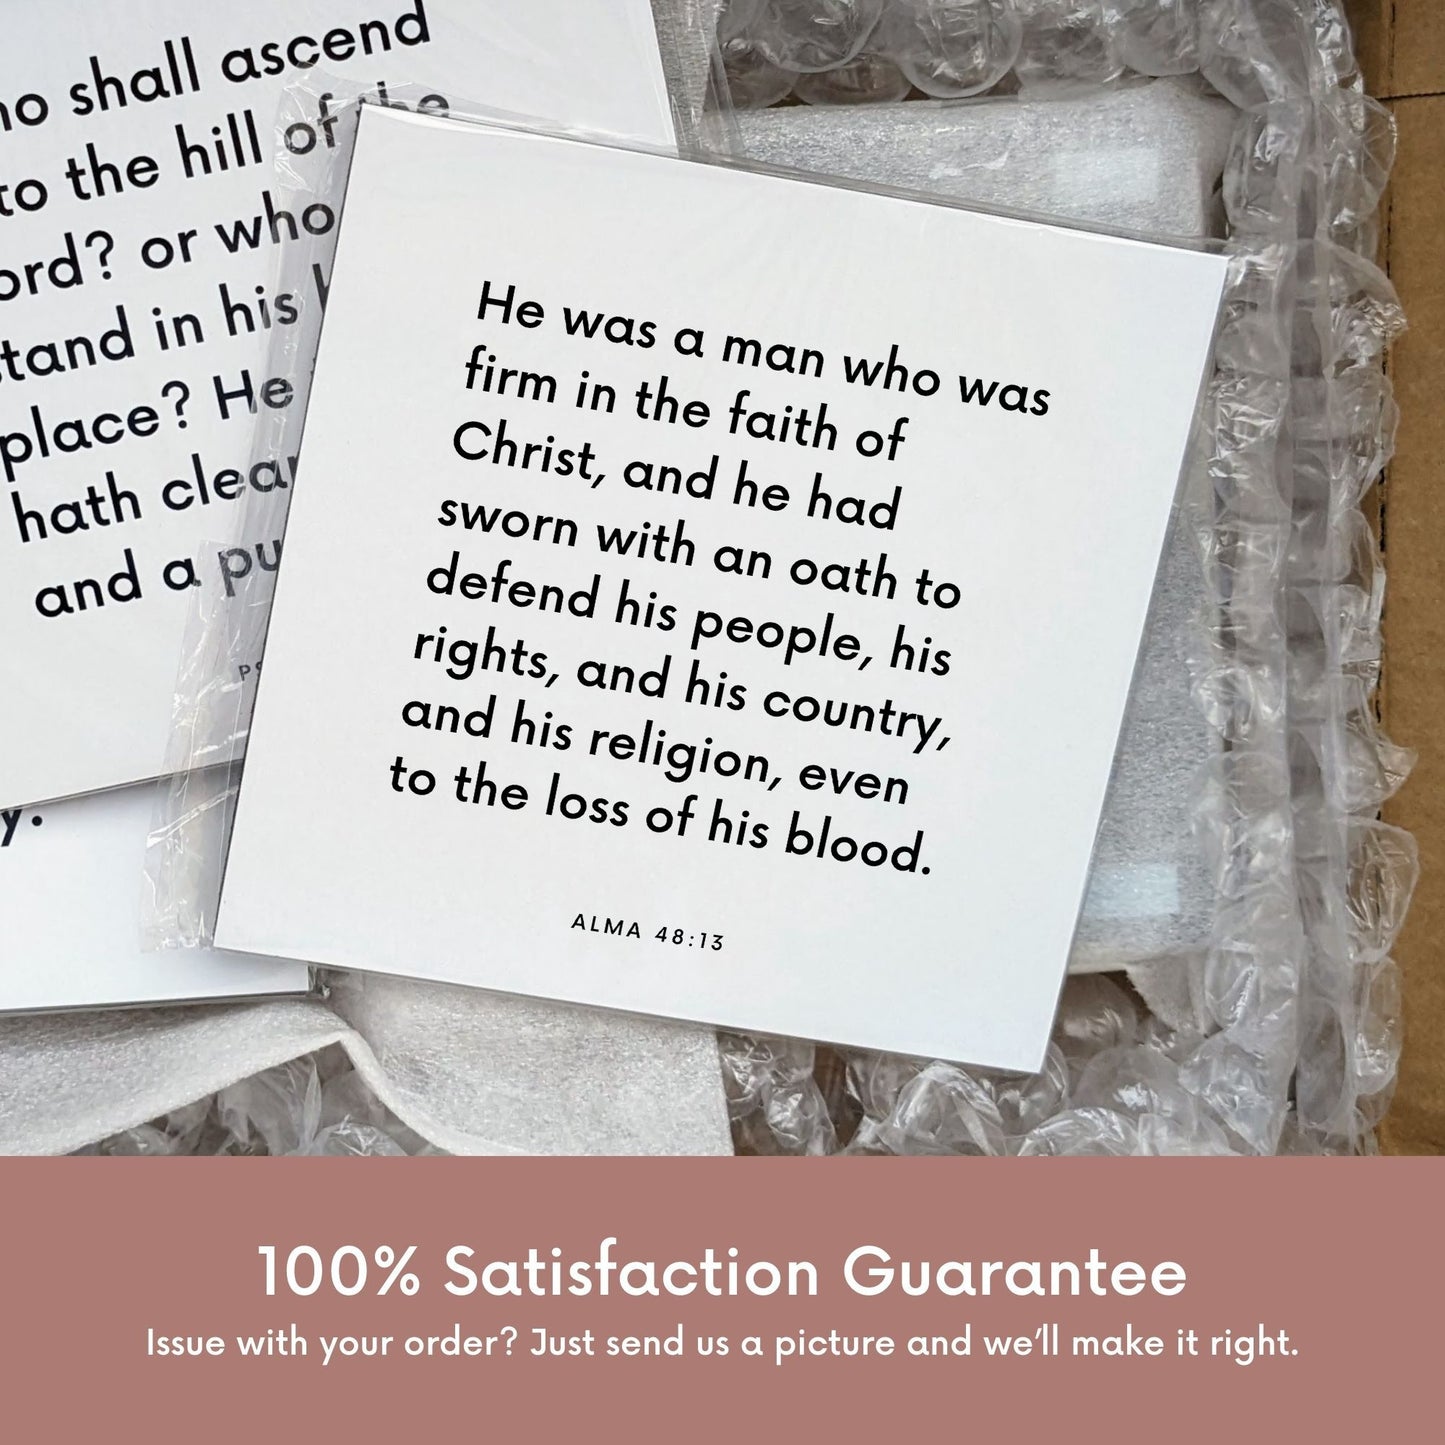 Shipping materials for scripture tile of Alma 48:13 - "He was a man who was firm in the faith of Christ"